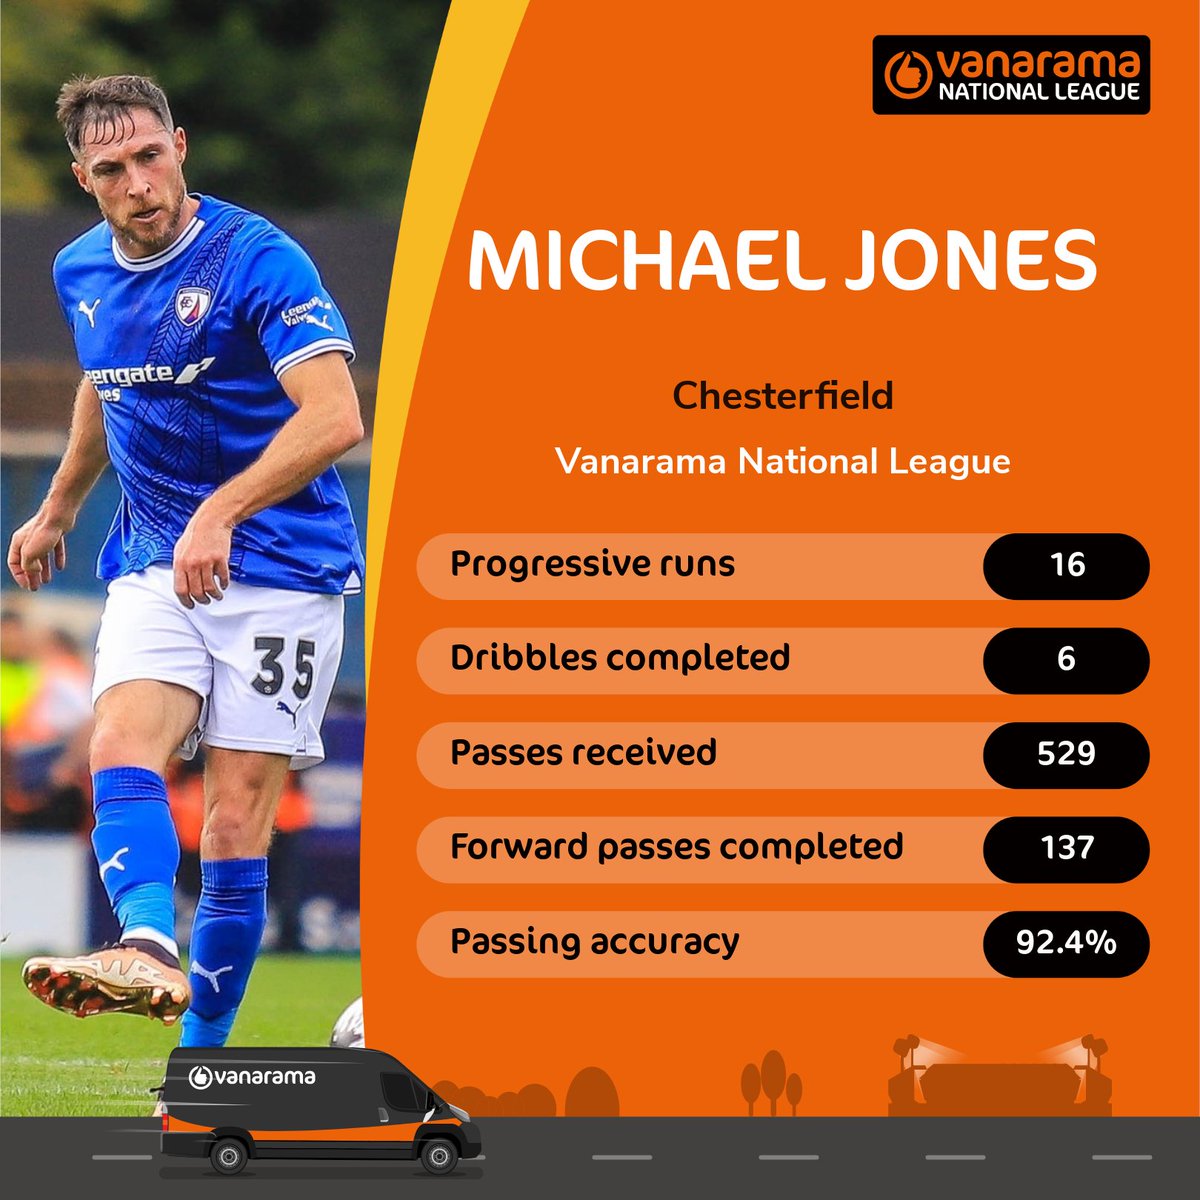 Only one central midfielder in @TheVanaramaNL has a higher pass completion rate than @Mjjona8 ✅ Now he's staying until 2⃣0⃣2⃣5⃣! 📸 @ChesterfieldFC #TheVanarama